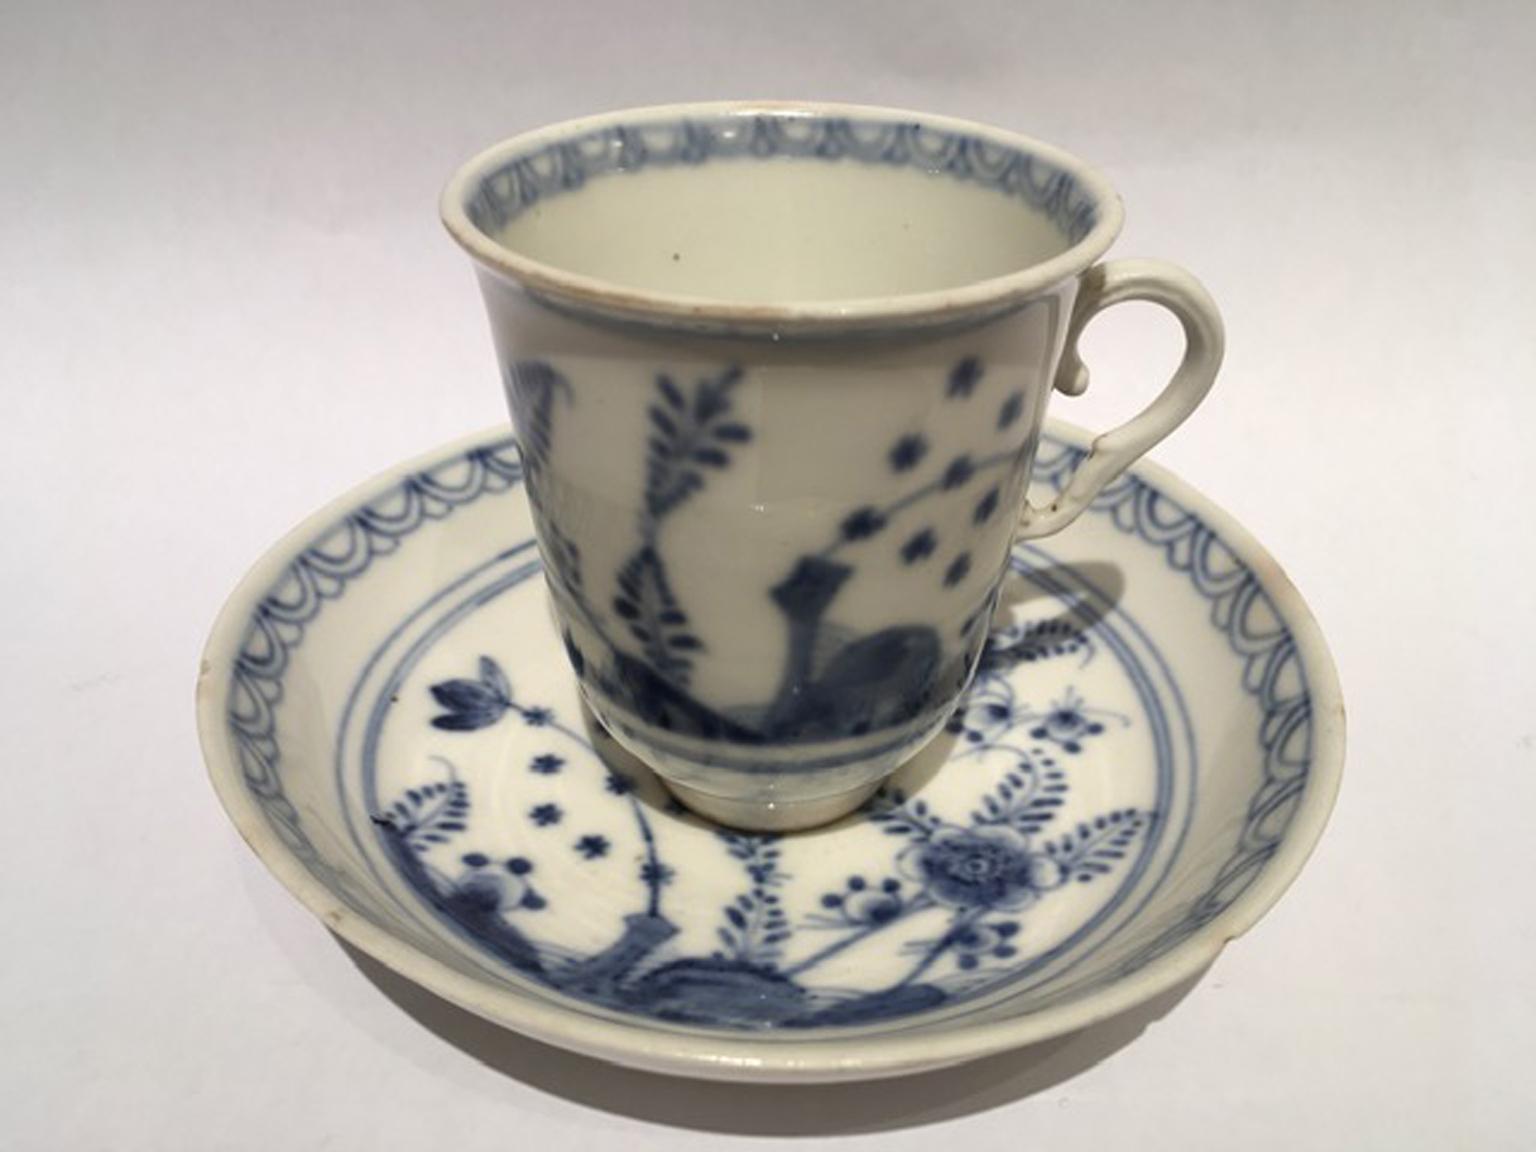 This is a small masterpiece of craftsmanship: the fine porcelain is designed with floral and natural scenes, rich in detail.
A piece for refined collectors or useful to start a collection

Marked on the back.
With certificate of